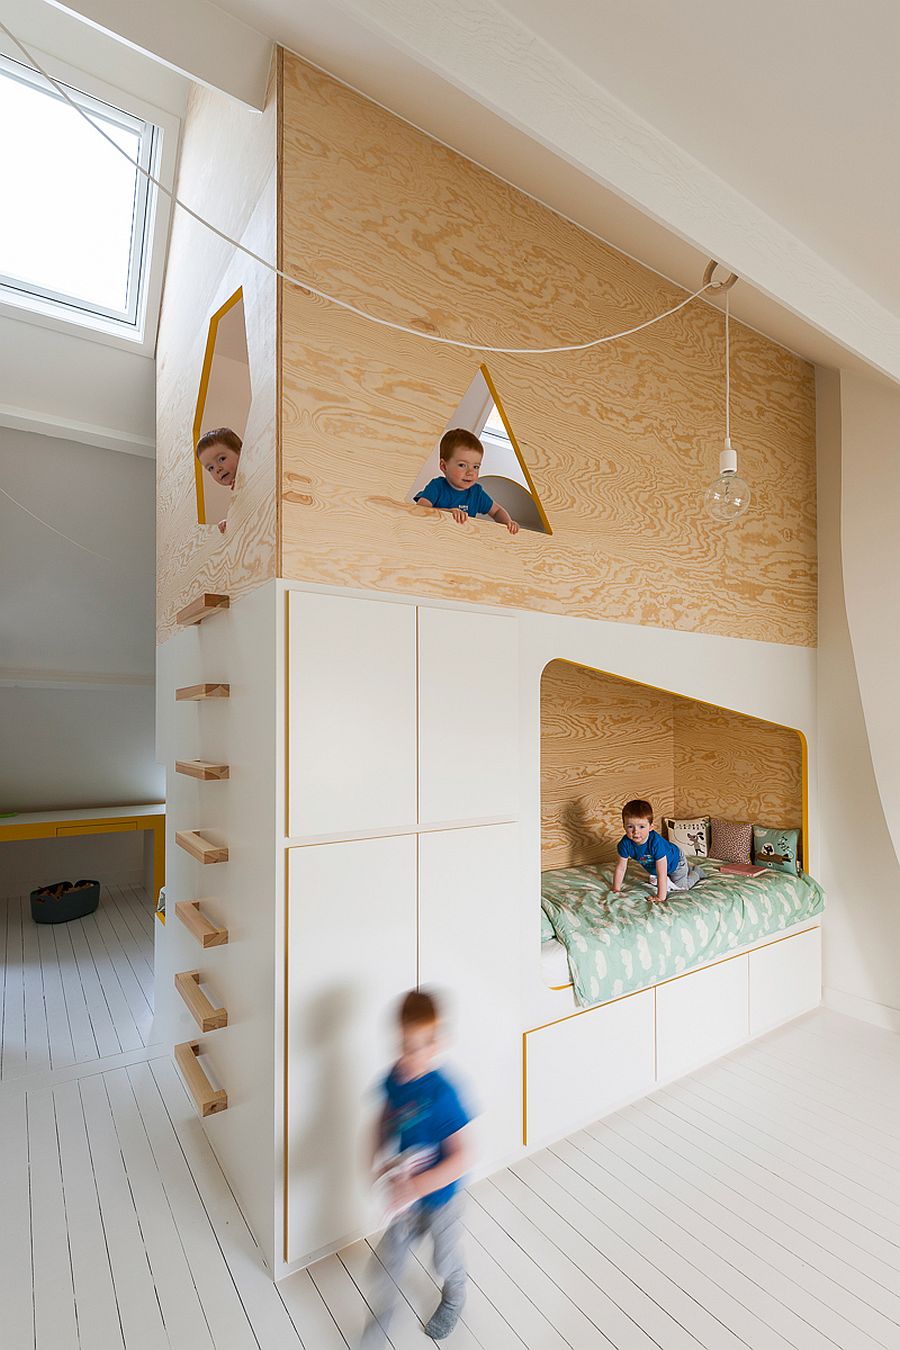 Twin-niches-for-the-beds-on-either-side-offer-sleeping-space